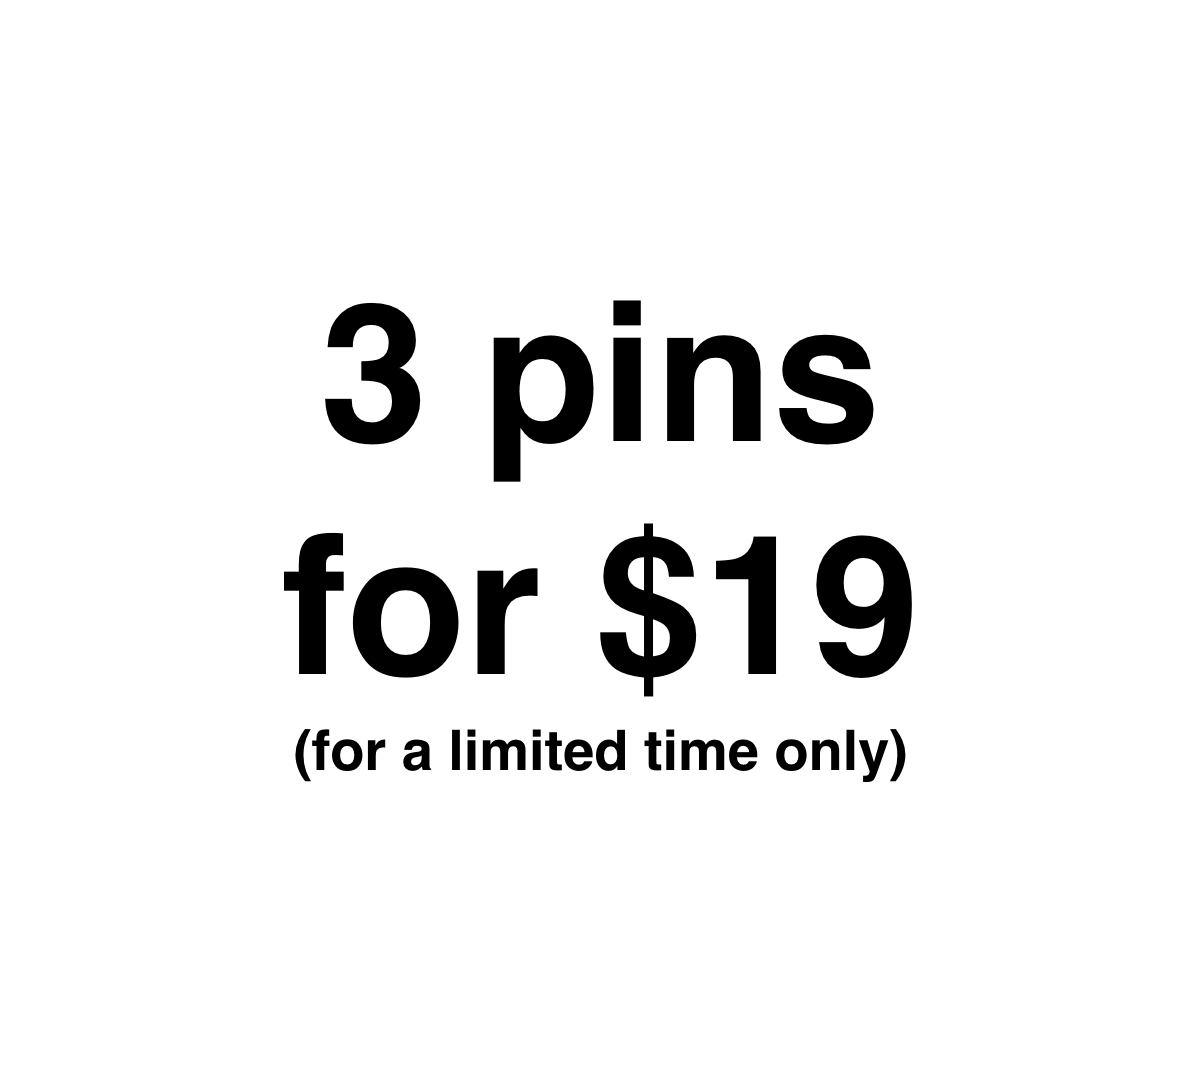 3 pins for $19 || Christmas Presents for people who love pins and collectible flair for your hat, lapel, jacket